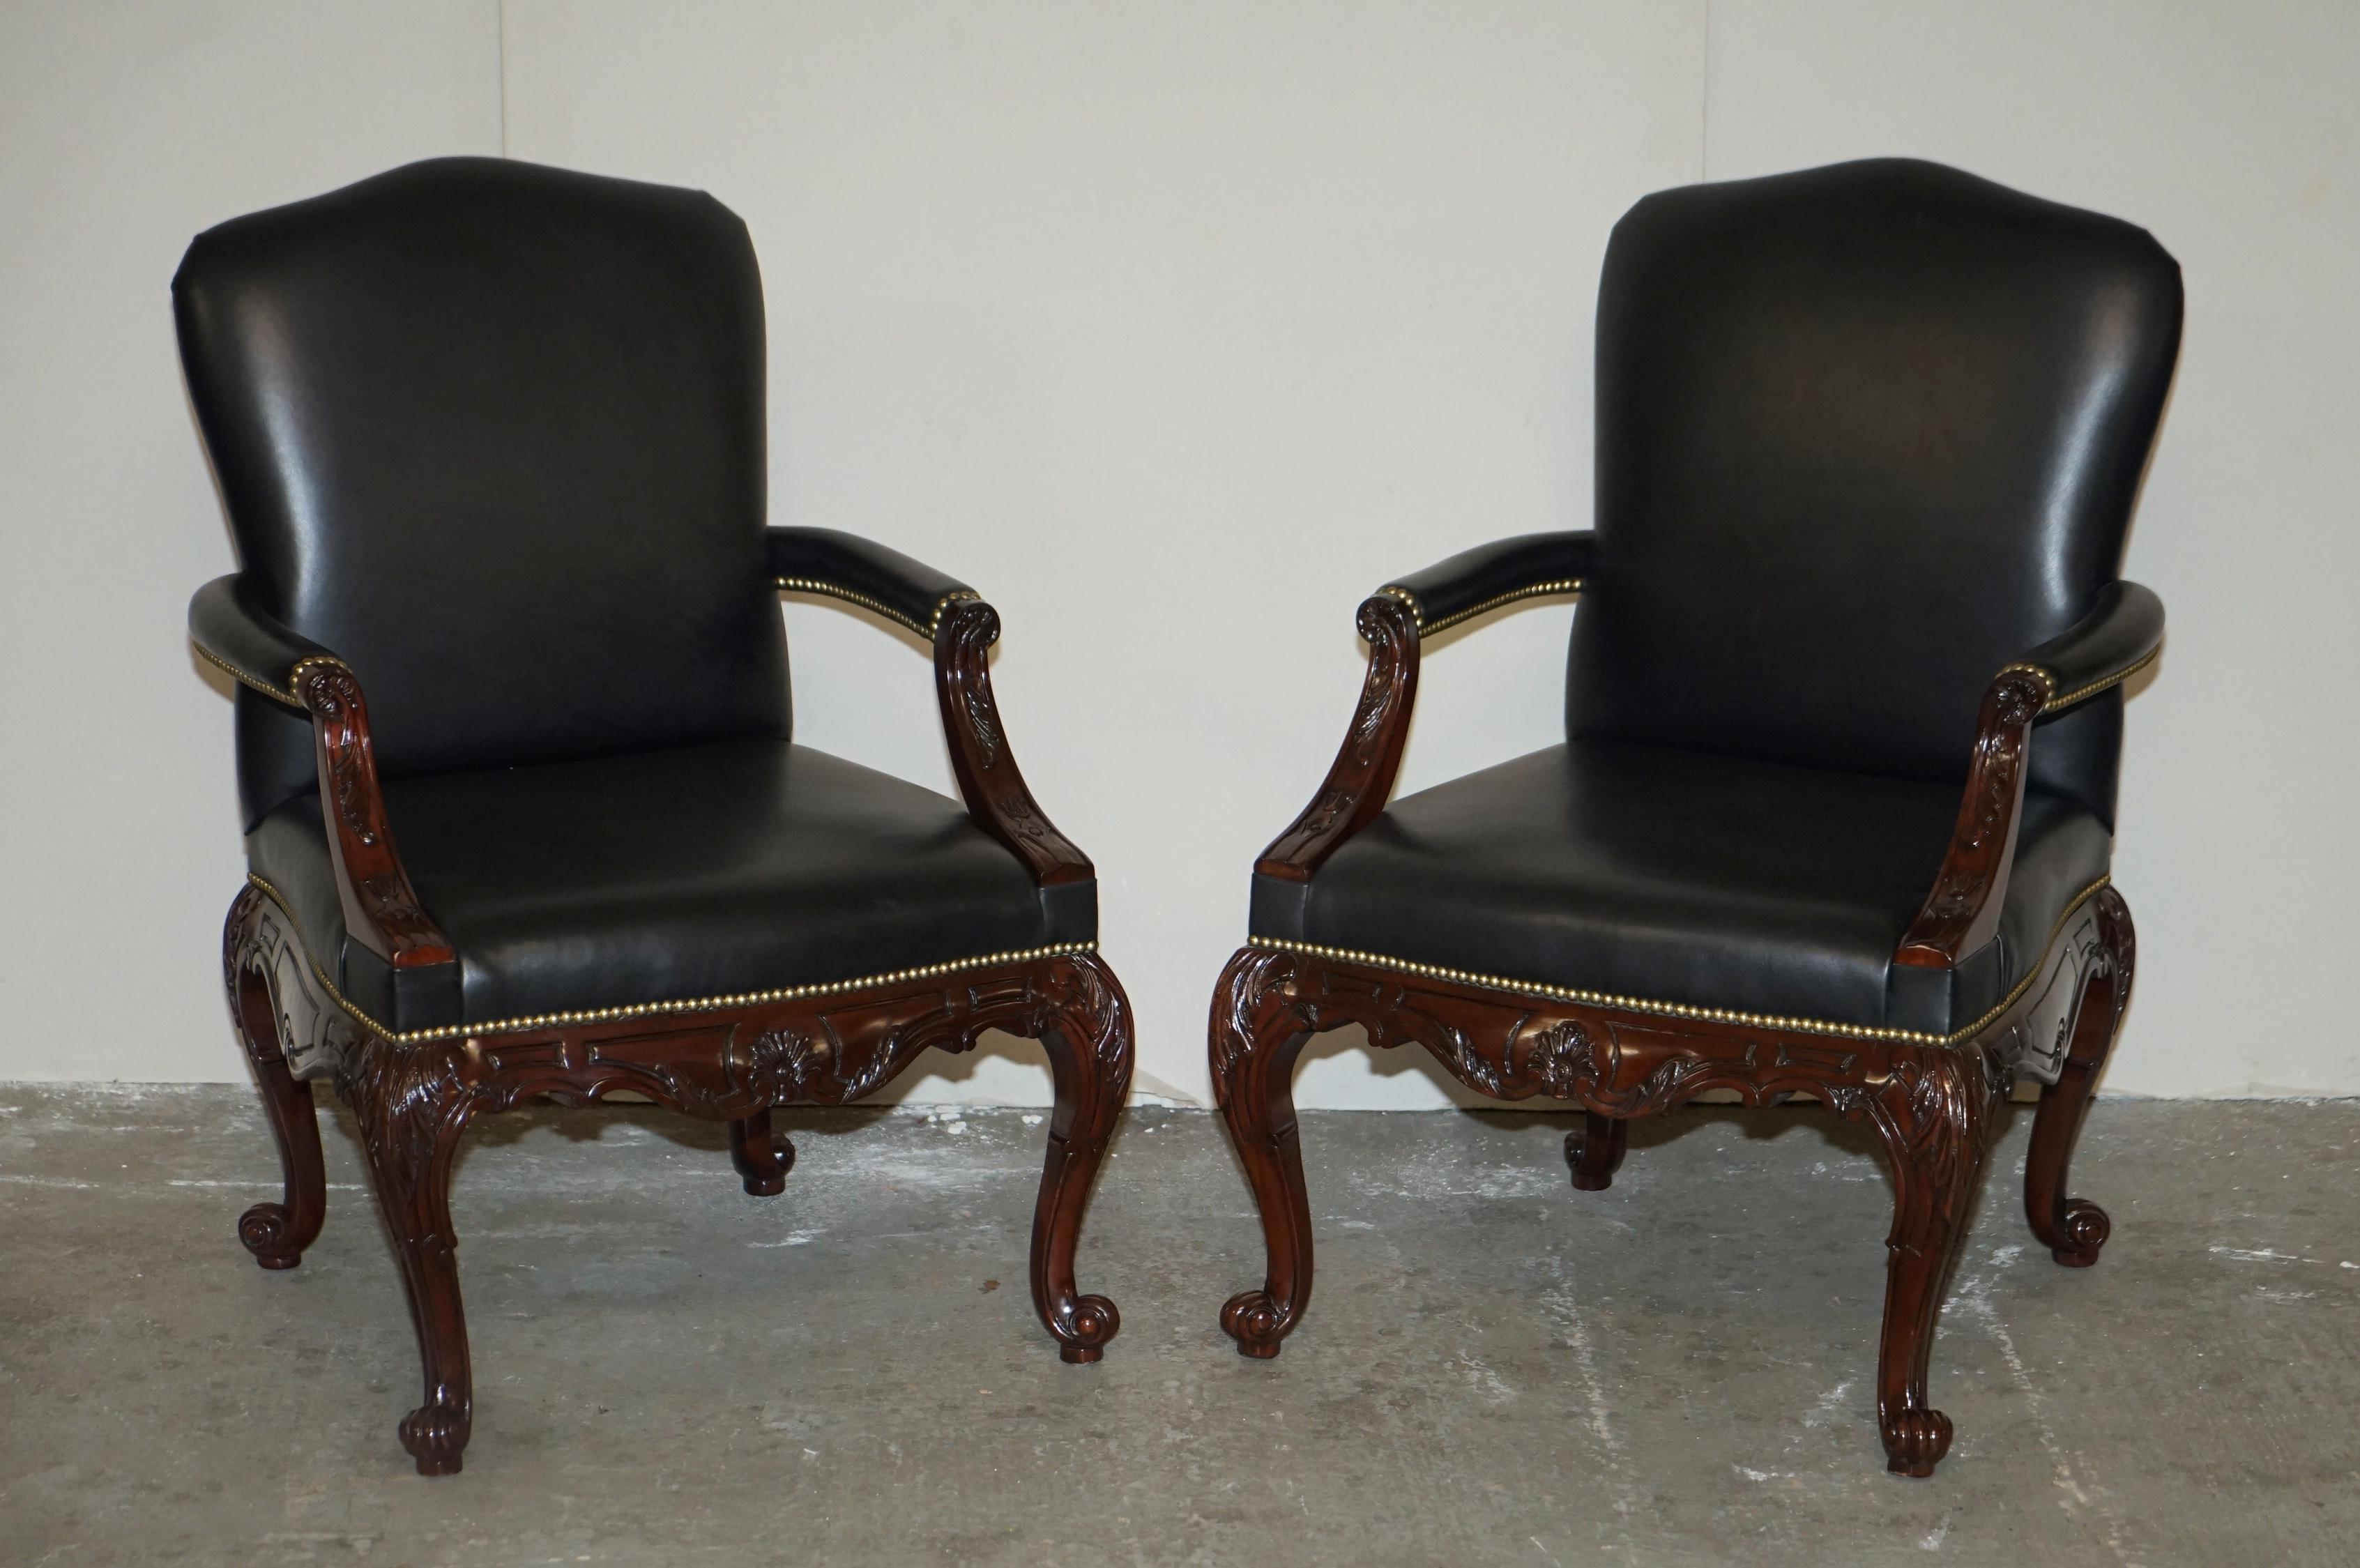 We are delighted to offer for sale this exquisite suite of eight Ralph Lauren Clivedon RRP £33,800 carver armchairs with black leather upholstery.

I have around 40 pieces of new Ralph Lauren furniture now in stock, most of which is from the Brook